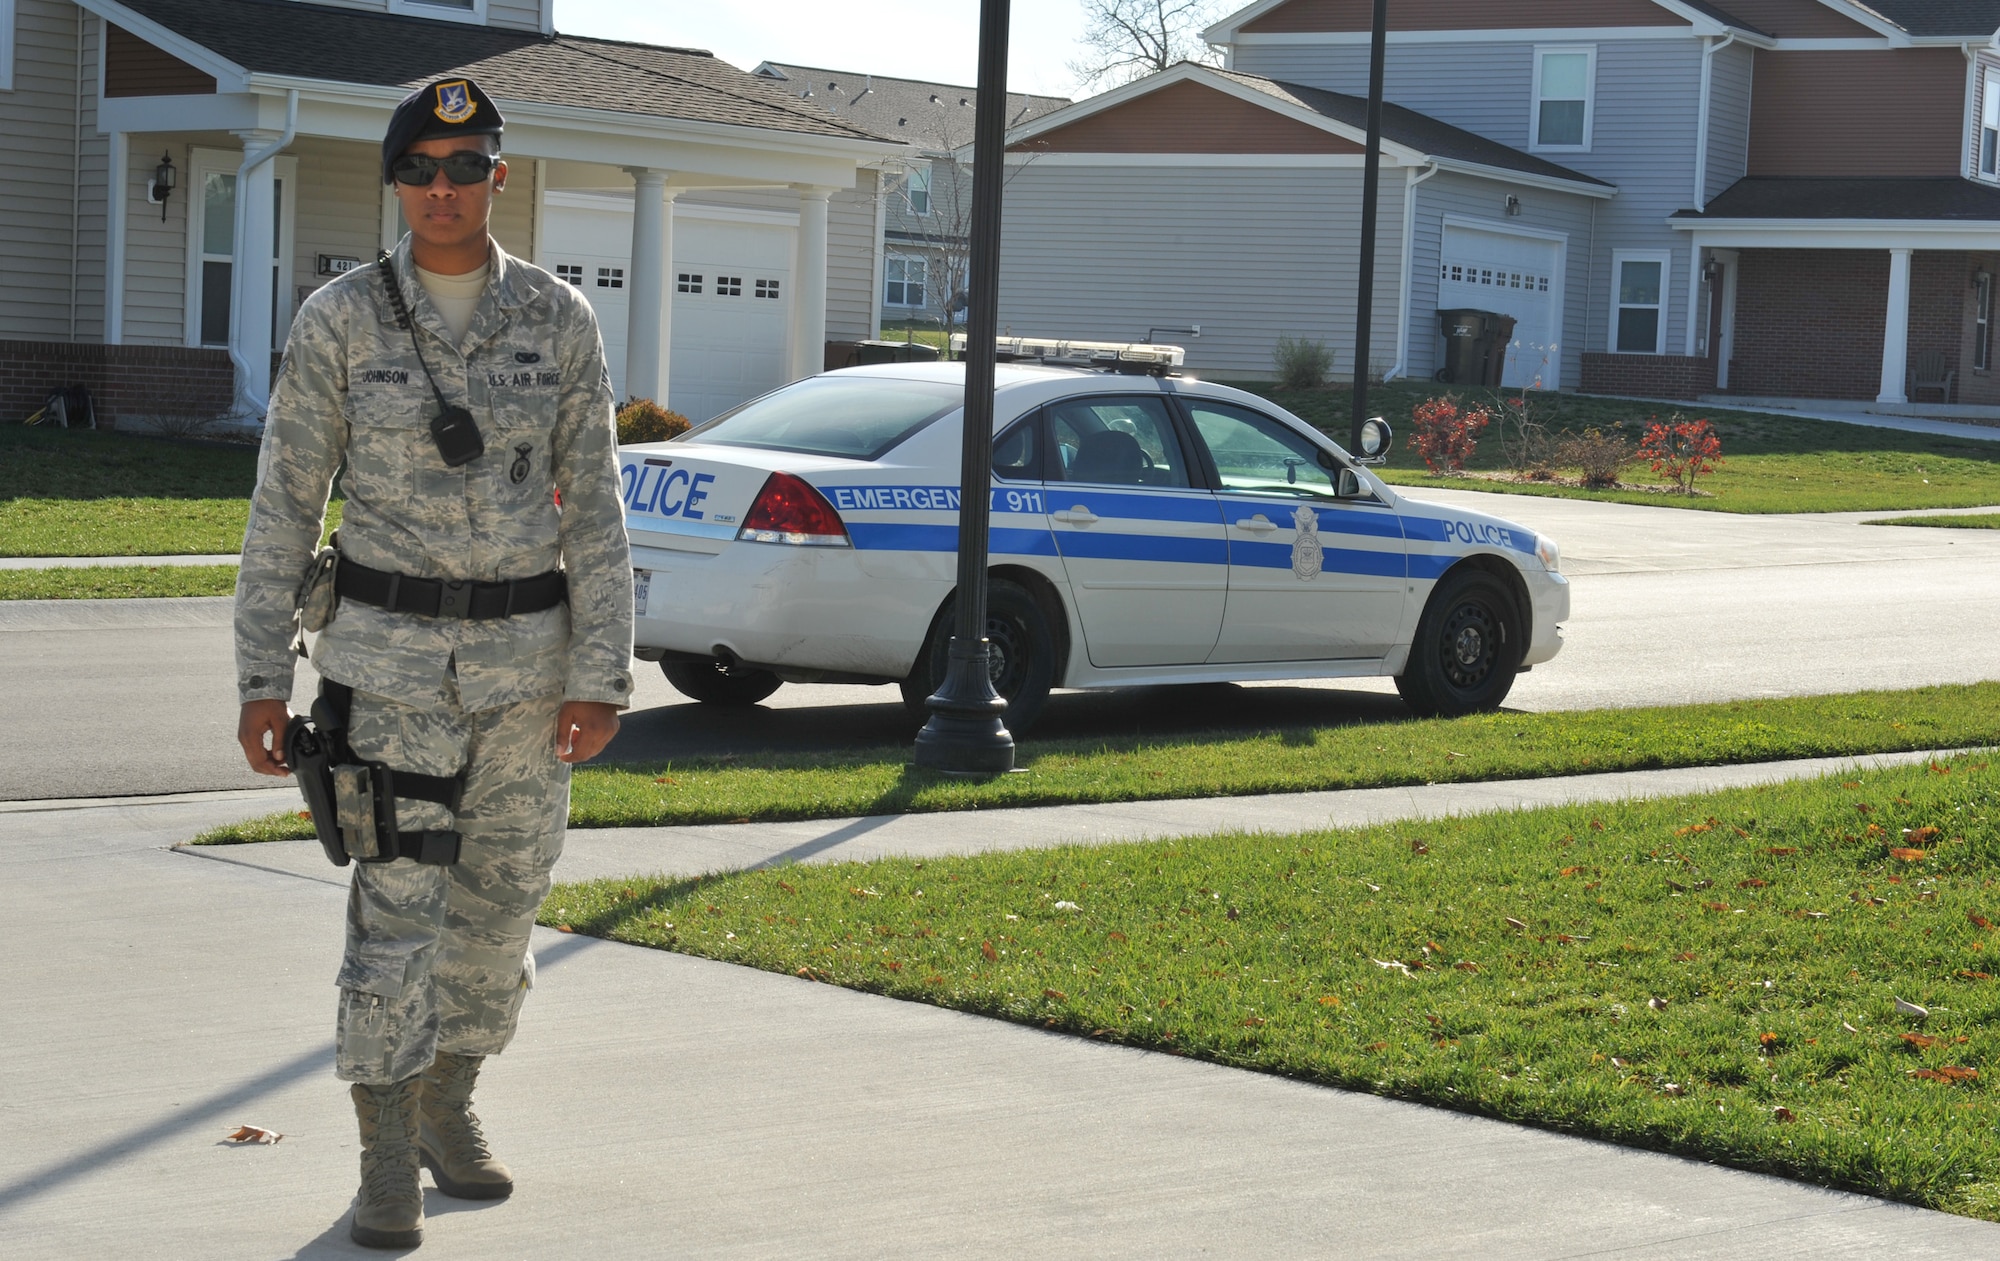 Senior Airman Keena Johnson, 509th Security Forces Squadron Law Enforcement, prepares to check a base resident's home as part of Operation Quarters Watch, at Whiteman Air Force Base Nov. 13. Under the Operation Quarters Watch program, the 509th Security Forces Squadron will conduct a physical house check and contact residents if they notice anything out of the ordinary. (U.S. Air Force photo/Heidi Hunt) (Released) 